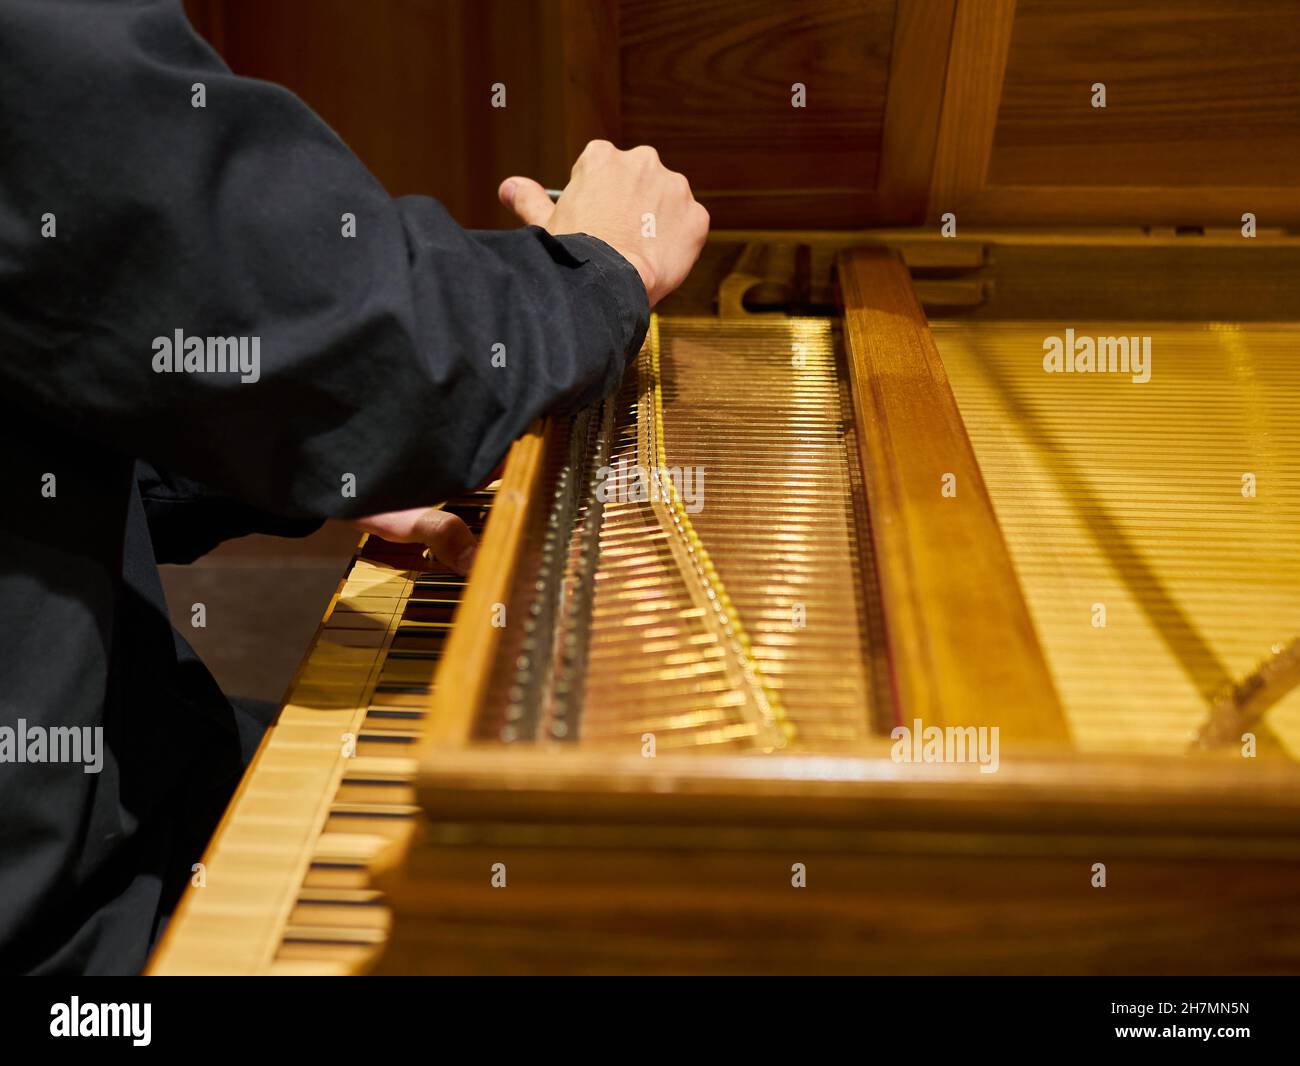 Musician tunes historical harpsichord cembalo with his hands before the concert. Stock Photo